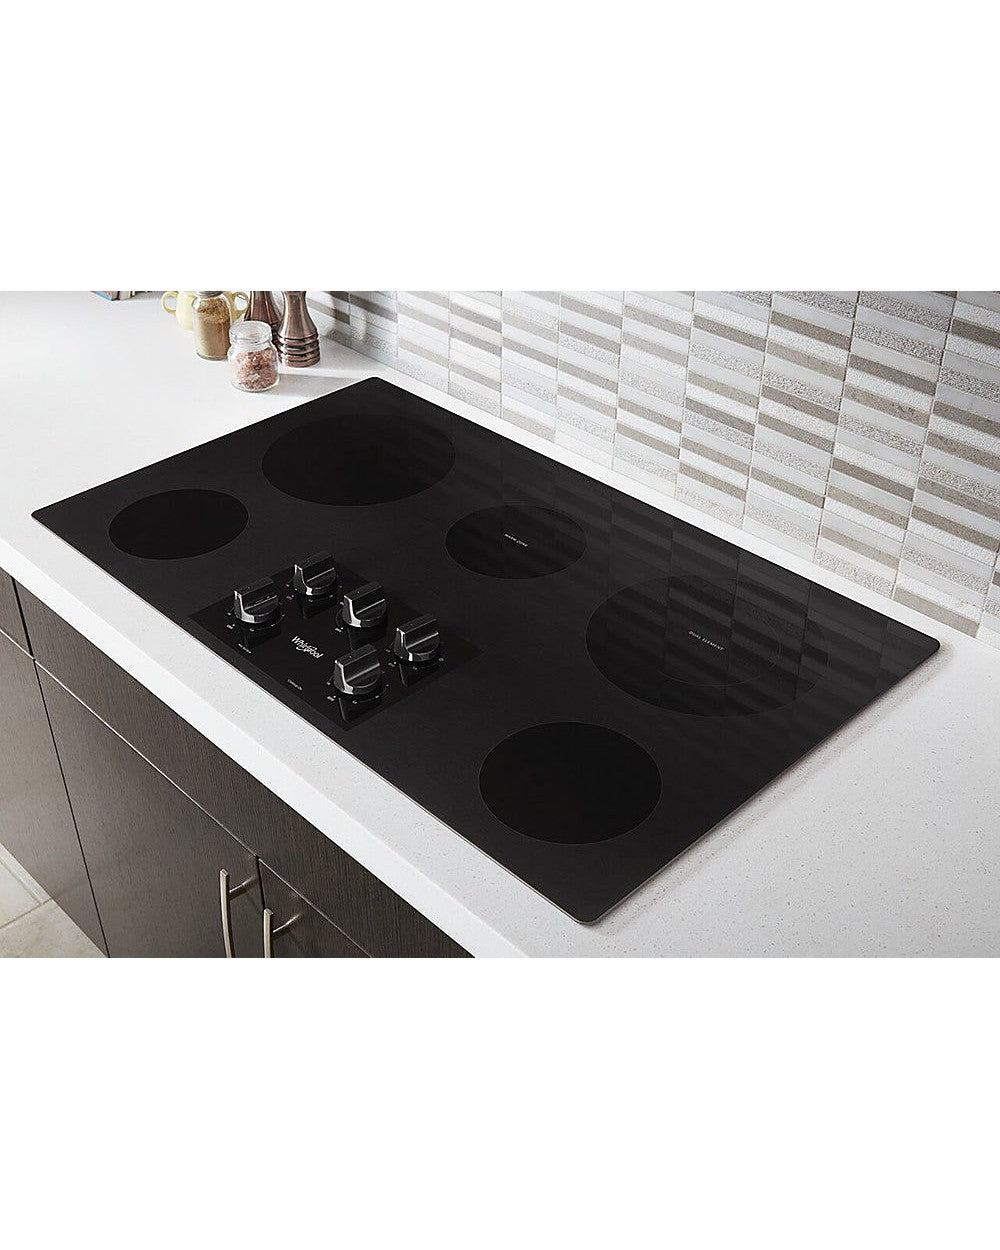 WHIRLPOOL WCE55US6HB 36-inch Electric Ceramic Glass Cooktop